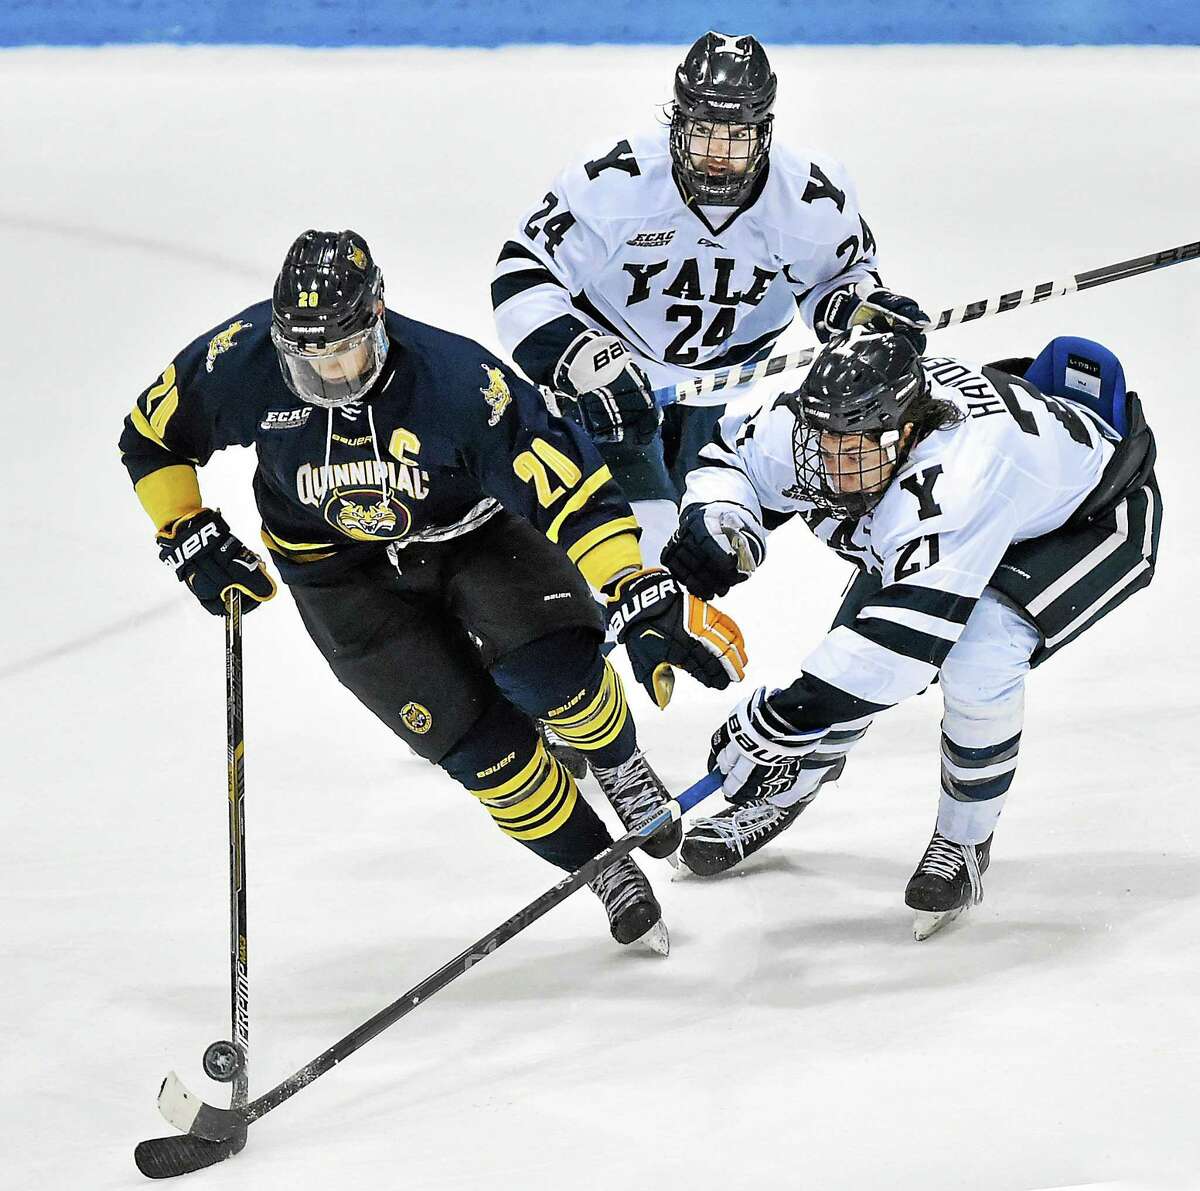 Catherine Avalone — Register file photo Quinnipiac’s Matthew Peca battles Yale’s John Hayden (21) and Mike Doherty (24) for possession of the puck during a January game at Ingalls Rink. Peca signed with the Tampa Bay Lightning on Wednesday.